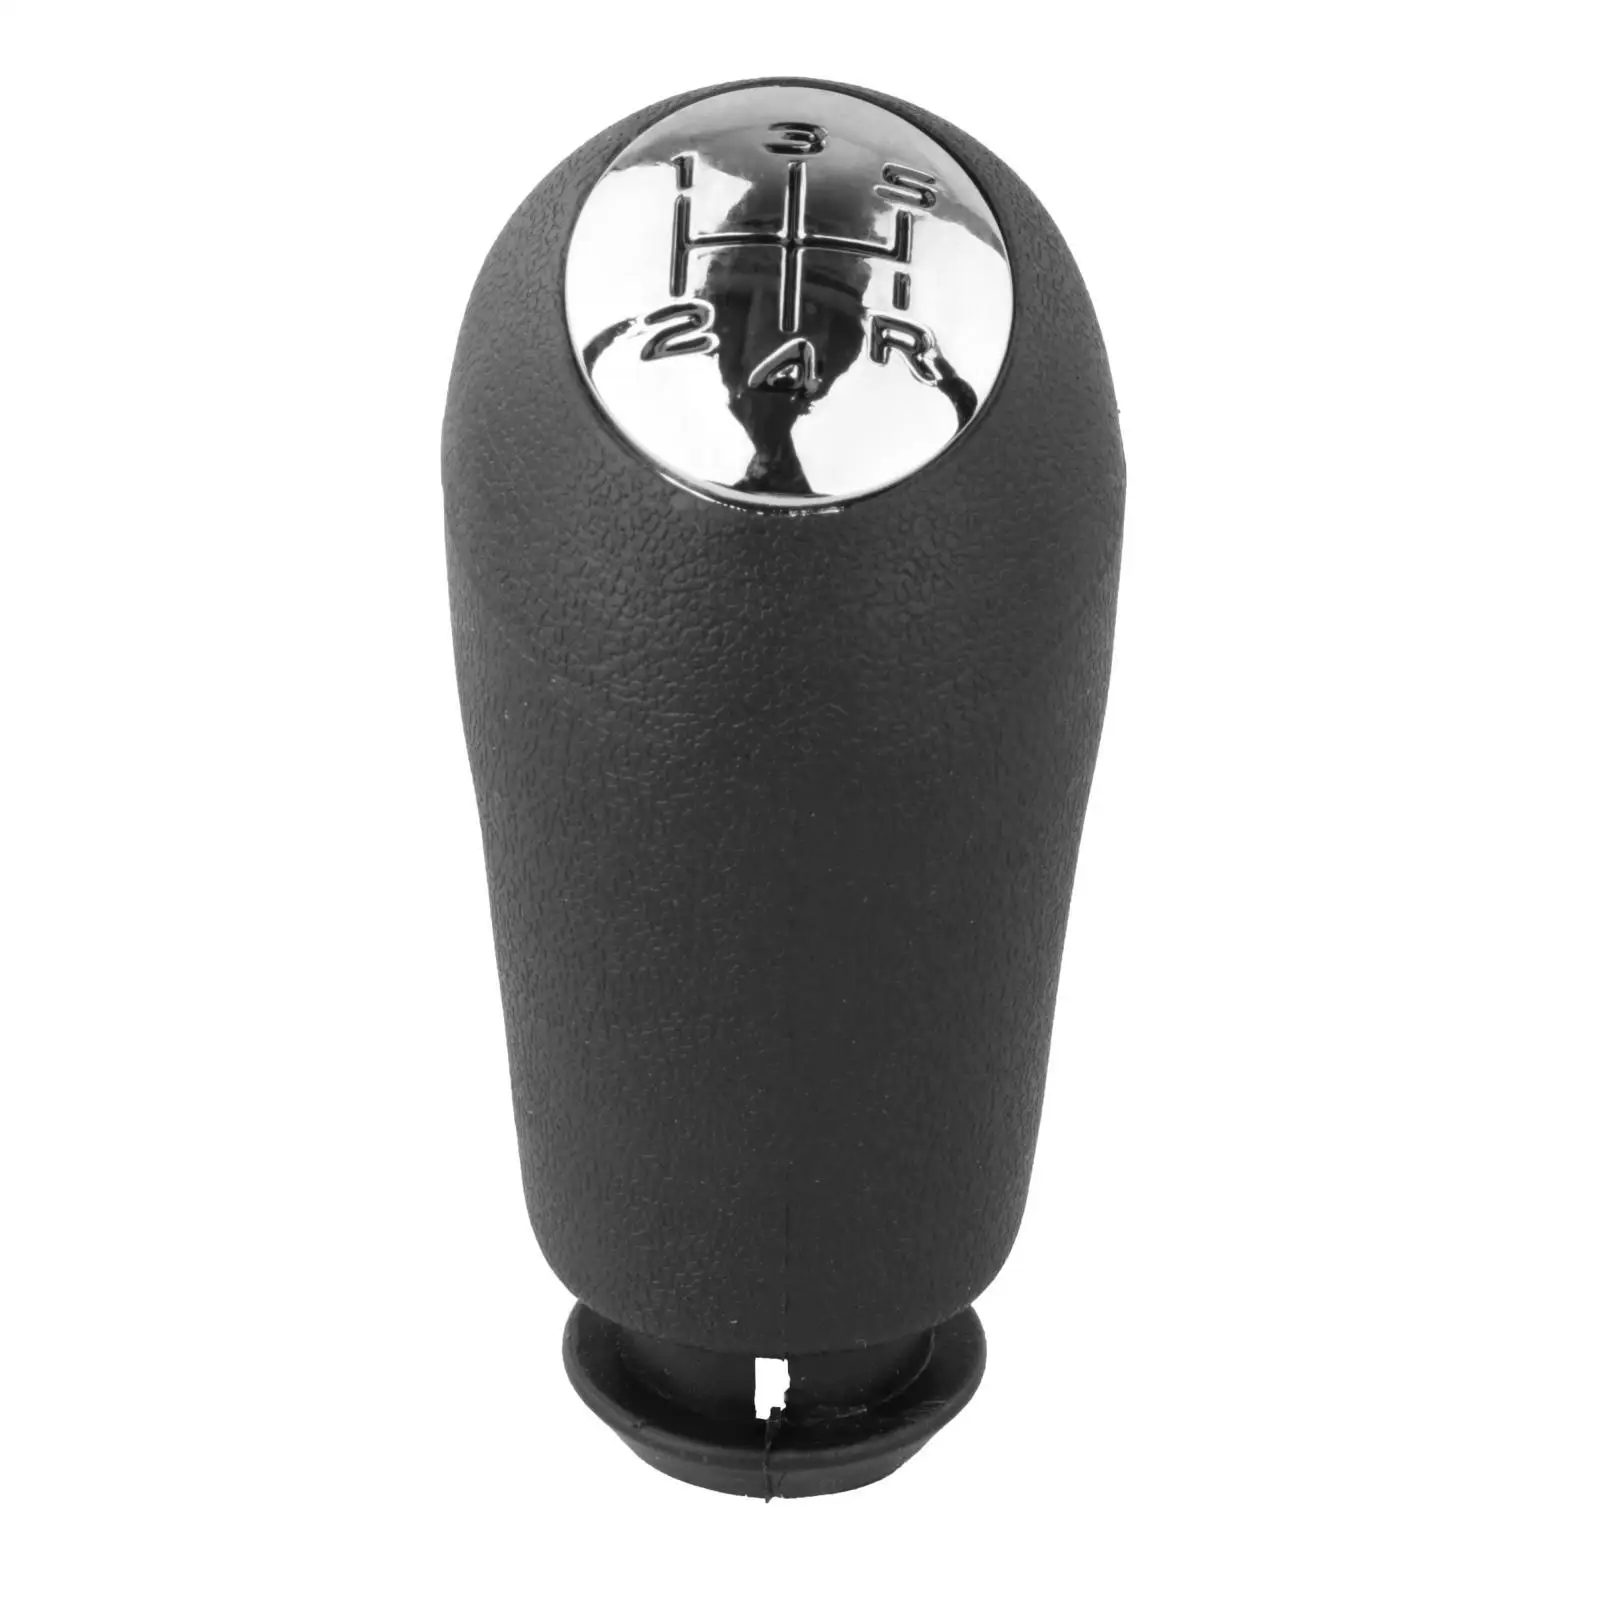 Car Manual Gear shifter Knob Replaces High Performance Easy to Install Accessories   Scenic   